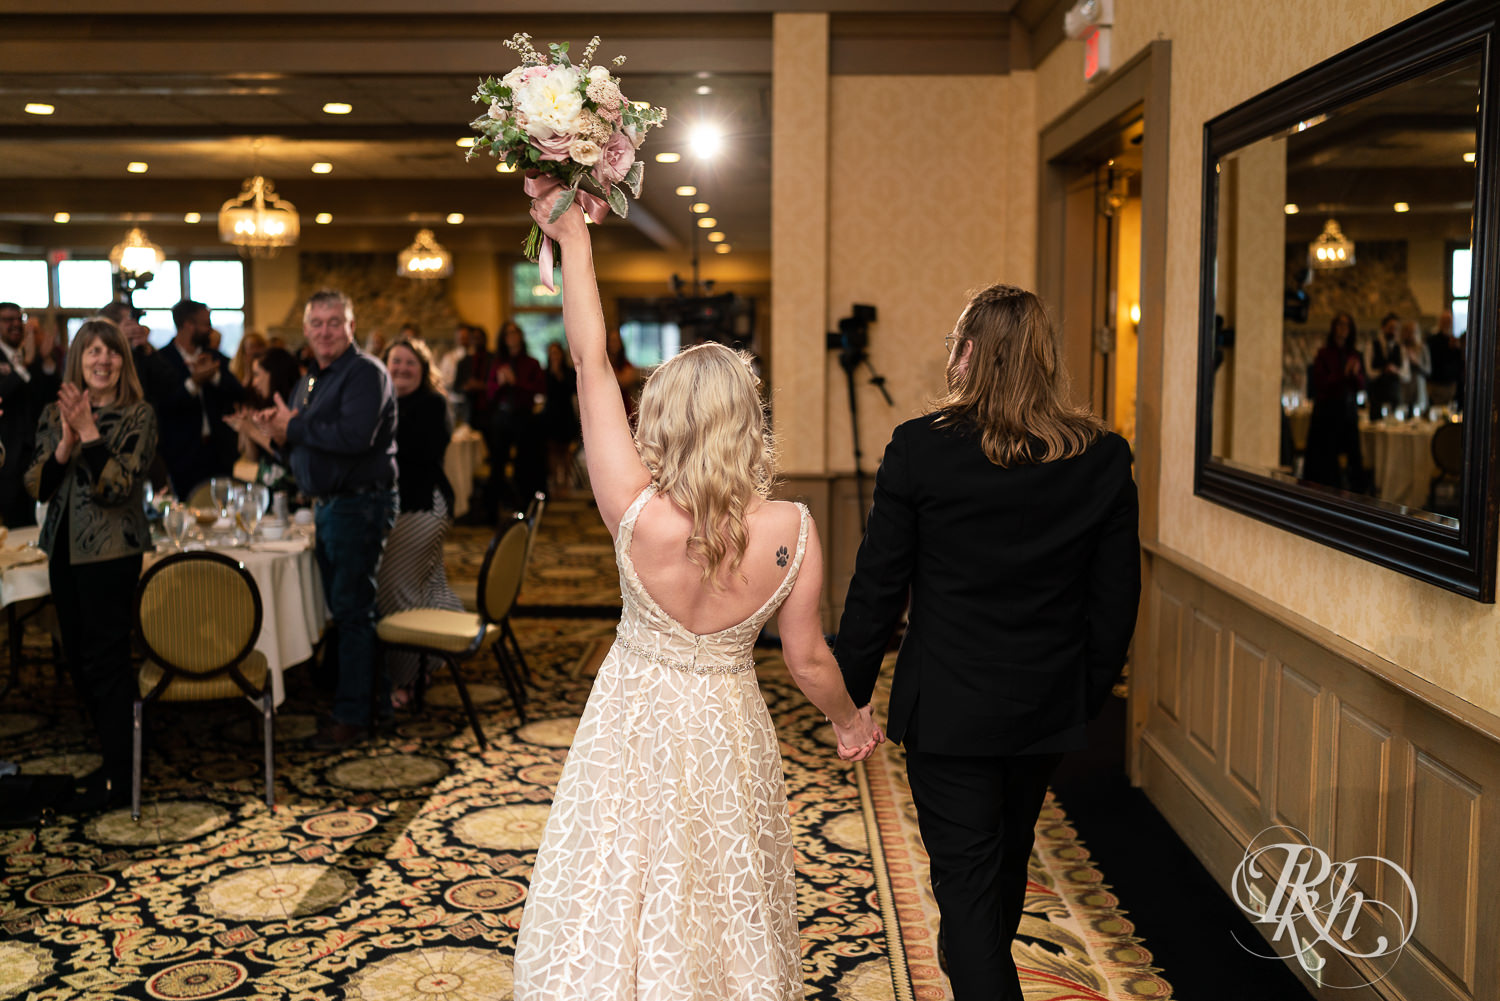 Bride and groom make grand entrance to reception at Rush Creek Golf Club in Maple Grove, Minnesota.